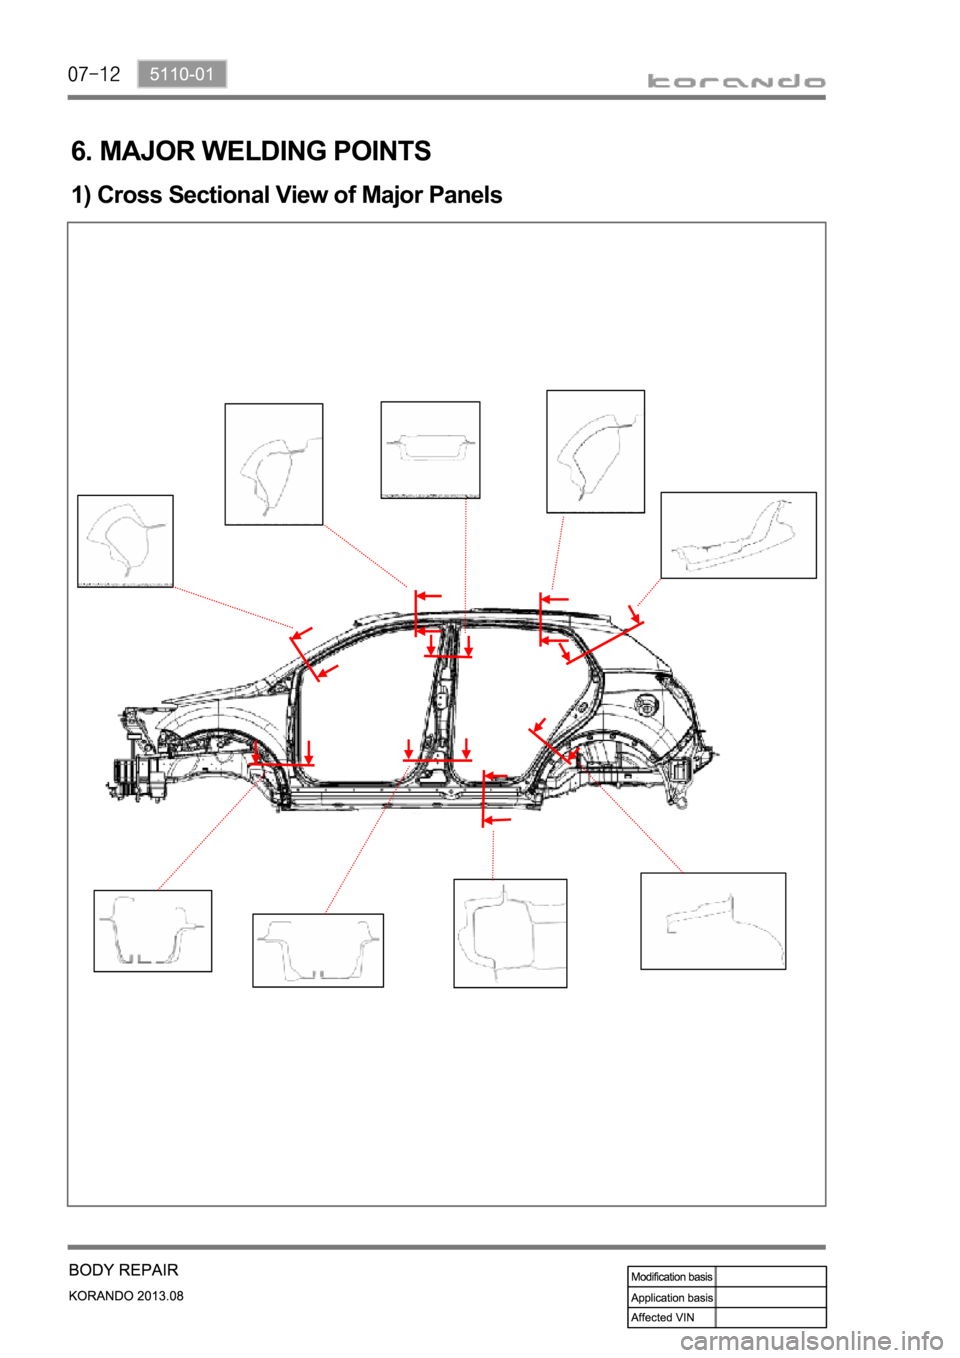 SSANGYONG KORANDO 2013  Service Manual 6. MAJOR WELDING POINTS
1) Cross Sectional View of Major Panels 